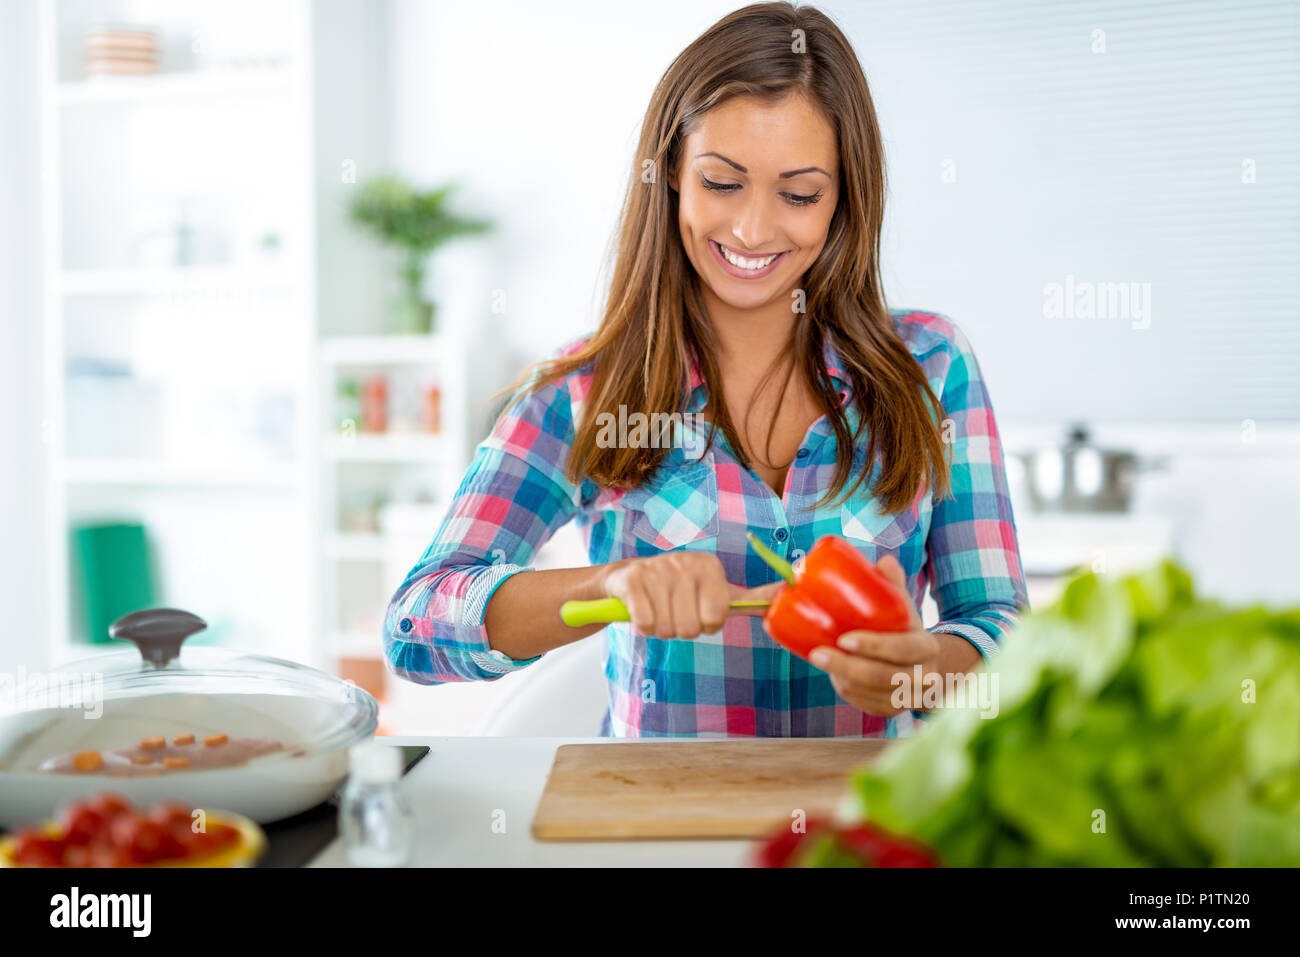 Beautiful young woman making healthy meal in the domestic kitchen. She prepares pepper for filling. Stock Photo